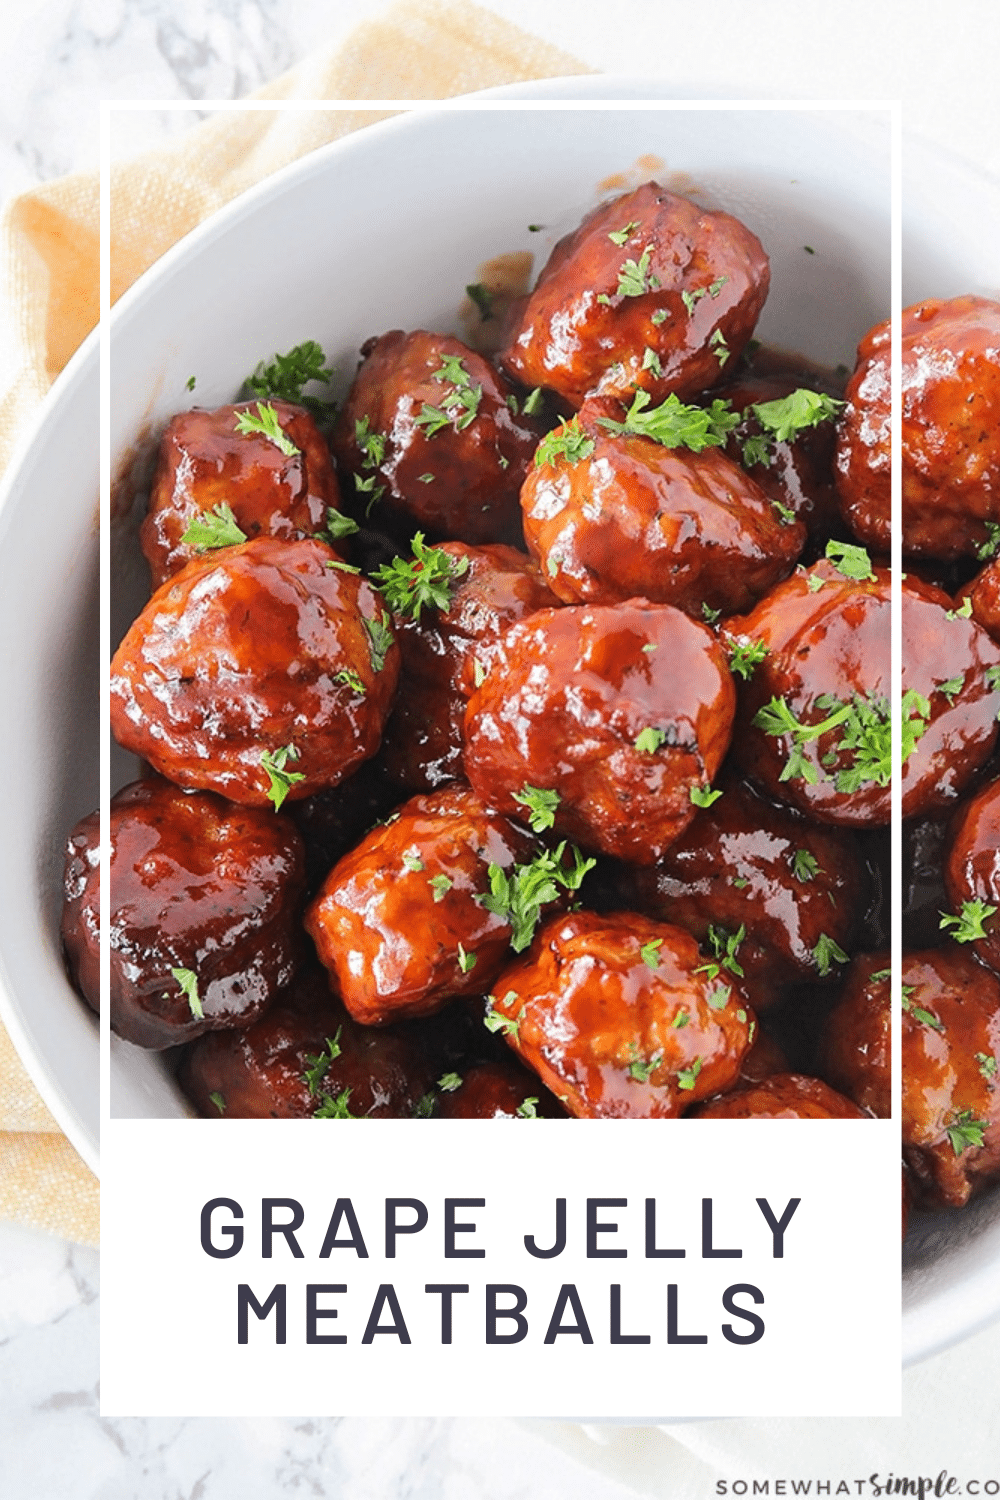 Ready for a simple dinner idea that your family will love? These grape jelly meatballs that you make in a crock pot are just for you! These meatballs are perfect for a simple meal or can be served as a delicious appetizer at your next party. Just throw everything in the slow cooker and get ready to be amazed! via @somewhatsimple